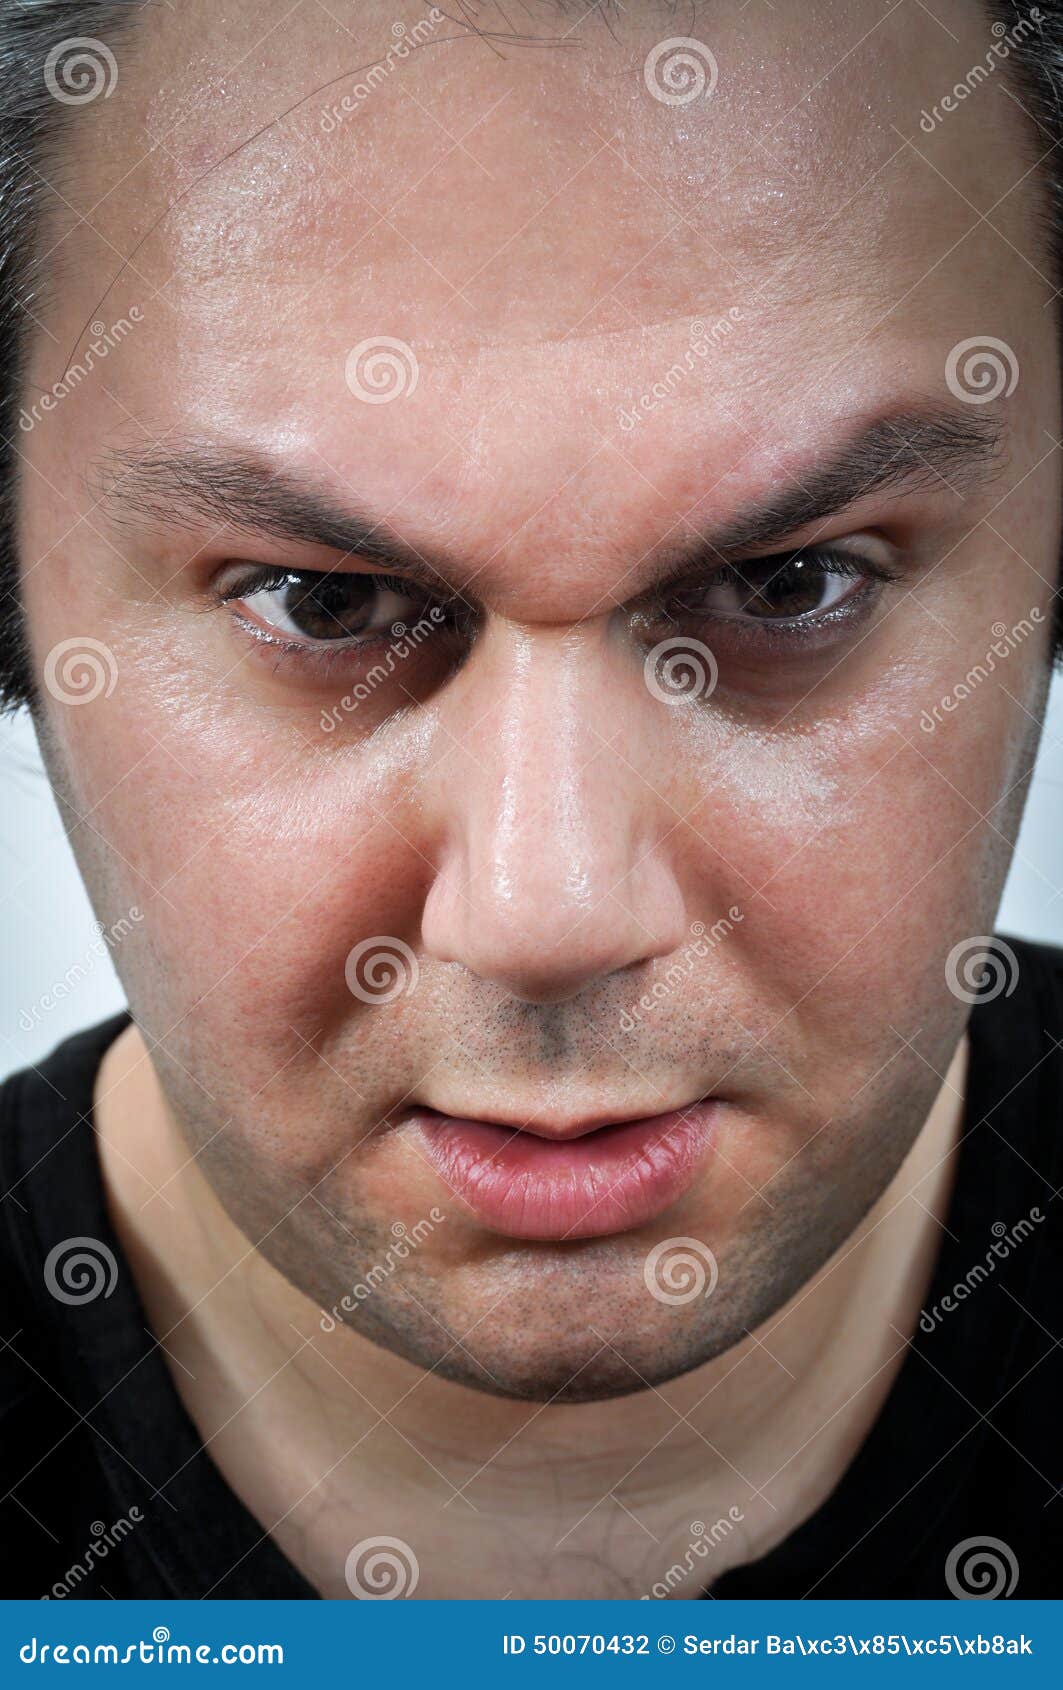 Depression Facial Expression Stock Photo - Image of crying, anger: 50070432